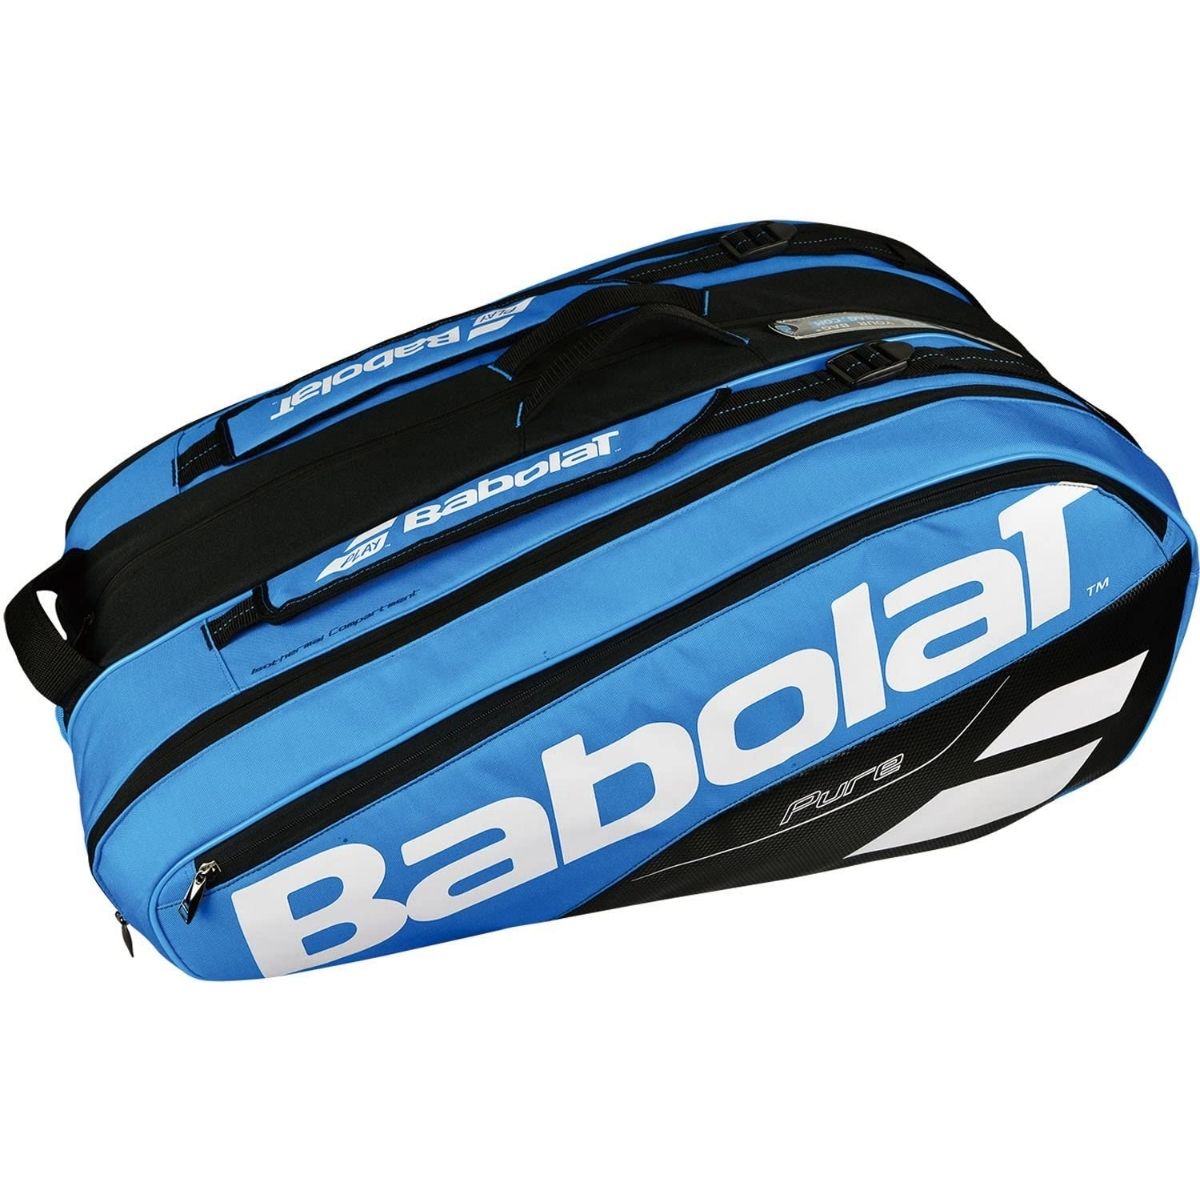 The Best Tennis Bags Options: Babolat Pure Drive RH x12 Bag